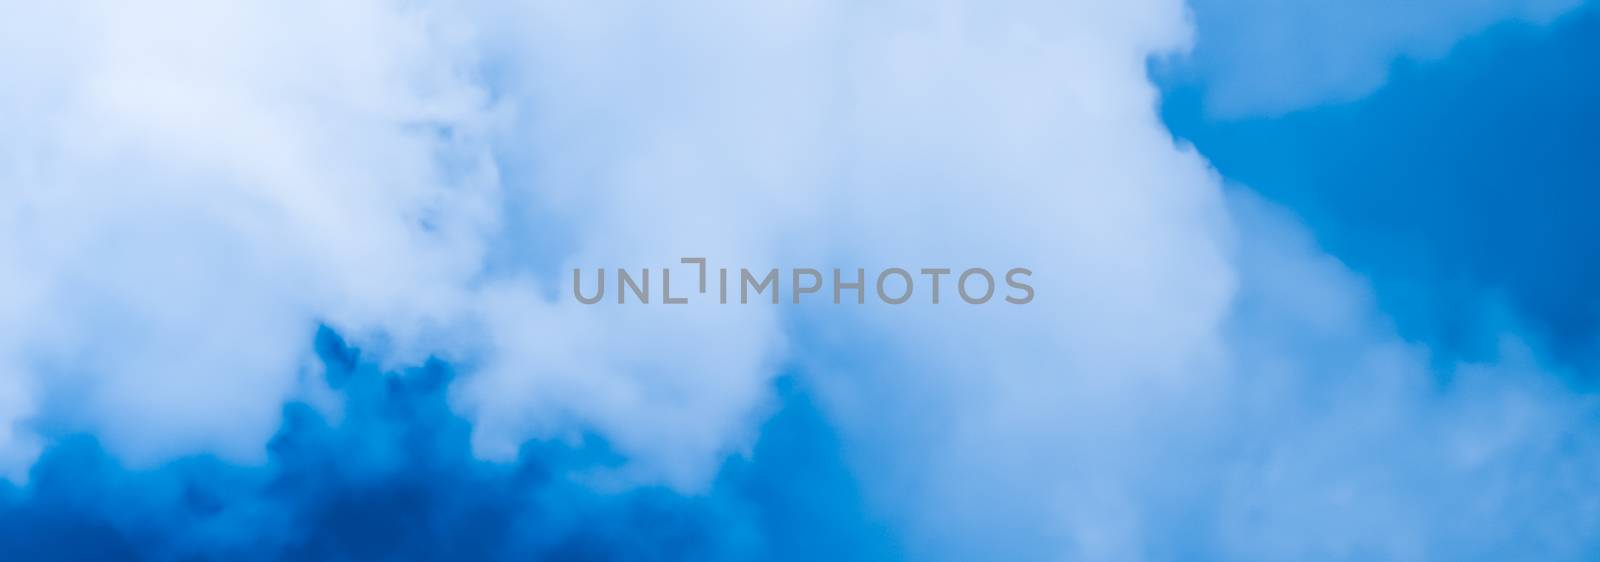 Dreamy blue sky and clouds, spiritual and nature background by Anneleven